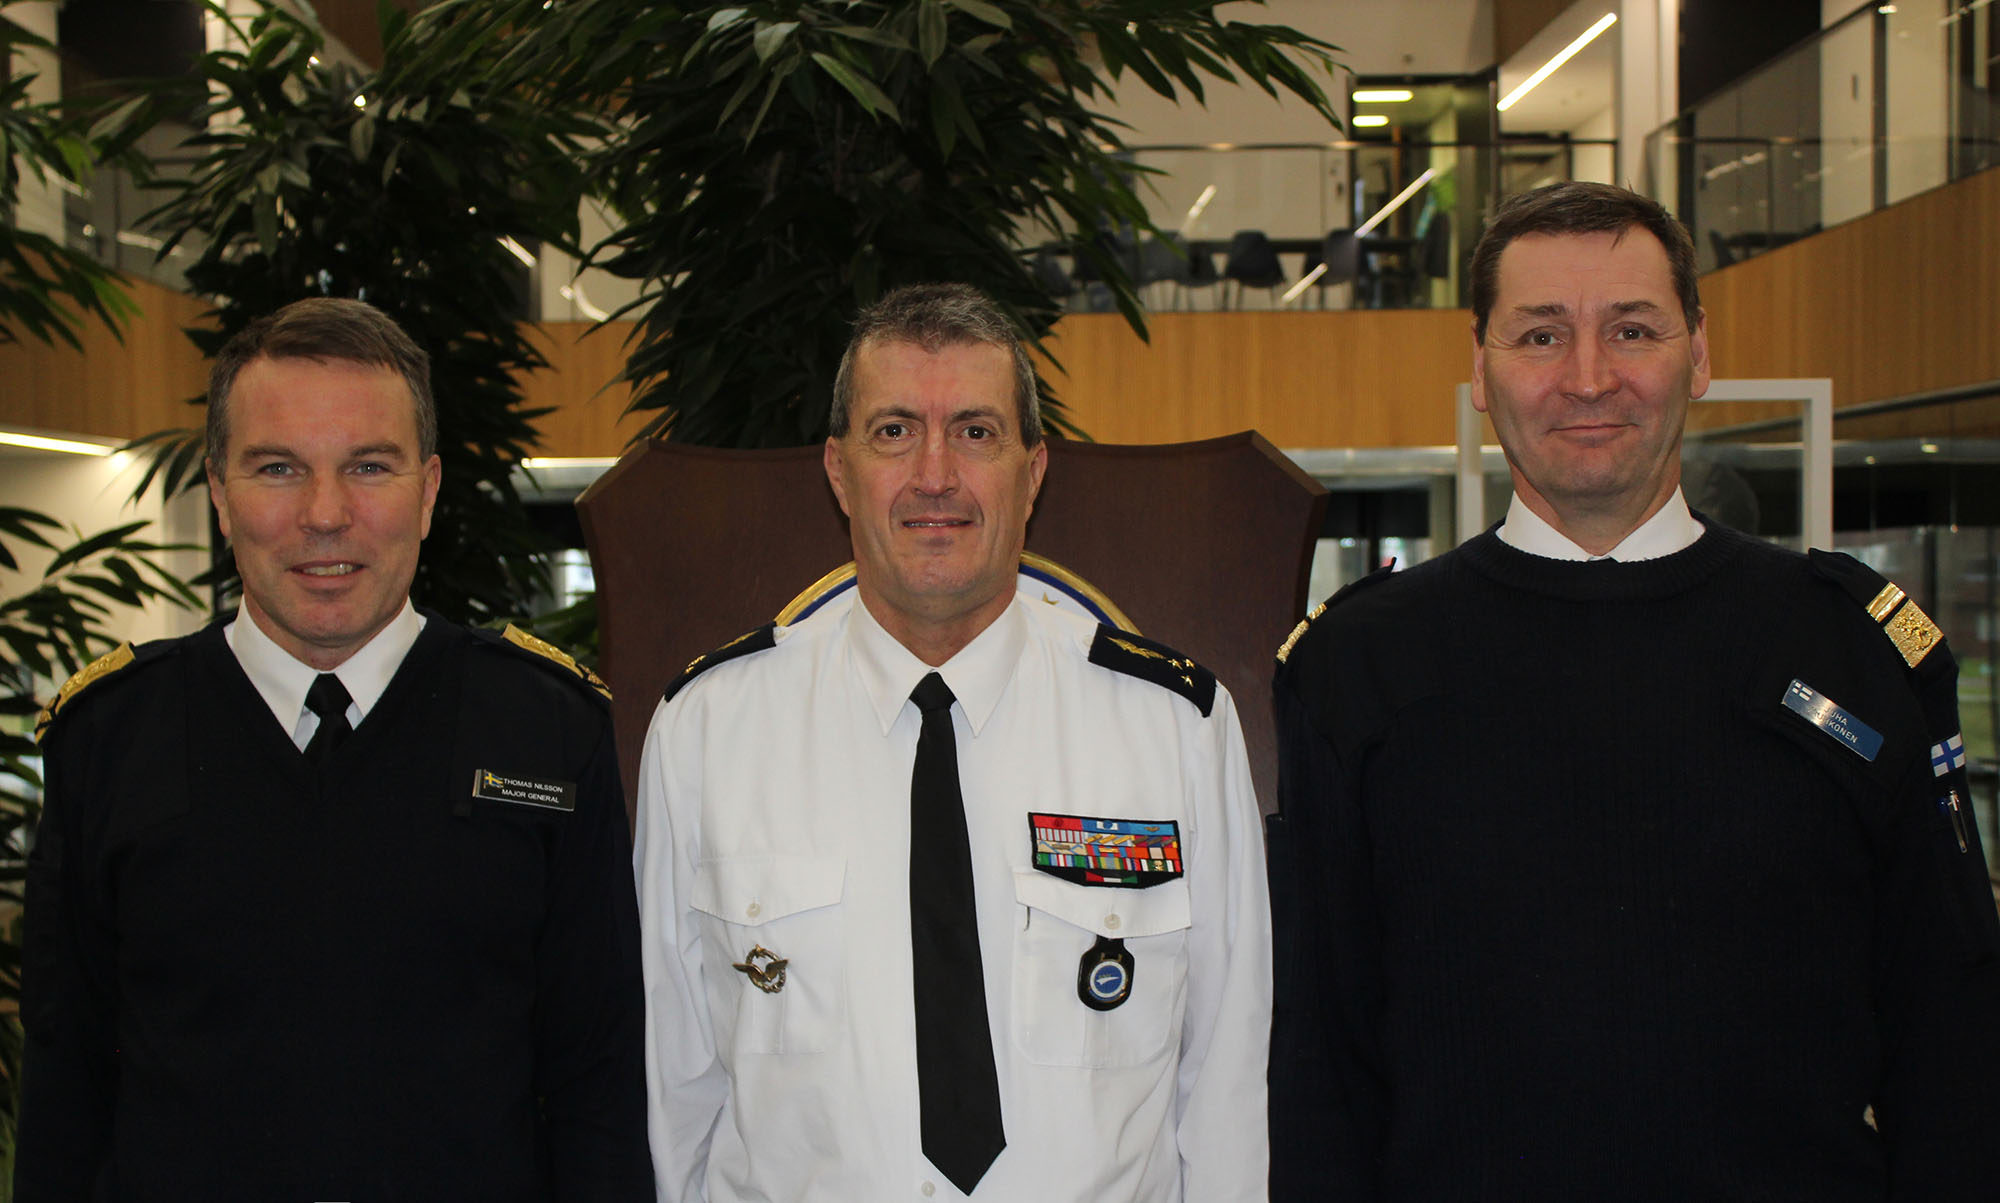 The Finnish and Swedish Military Representatives to the European Union and NATO visit EATC